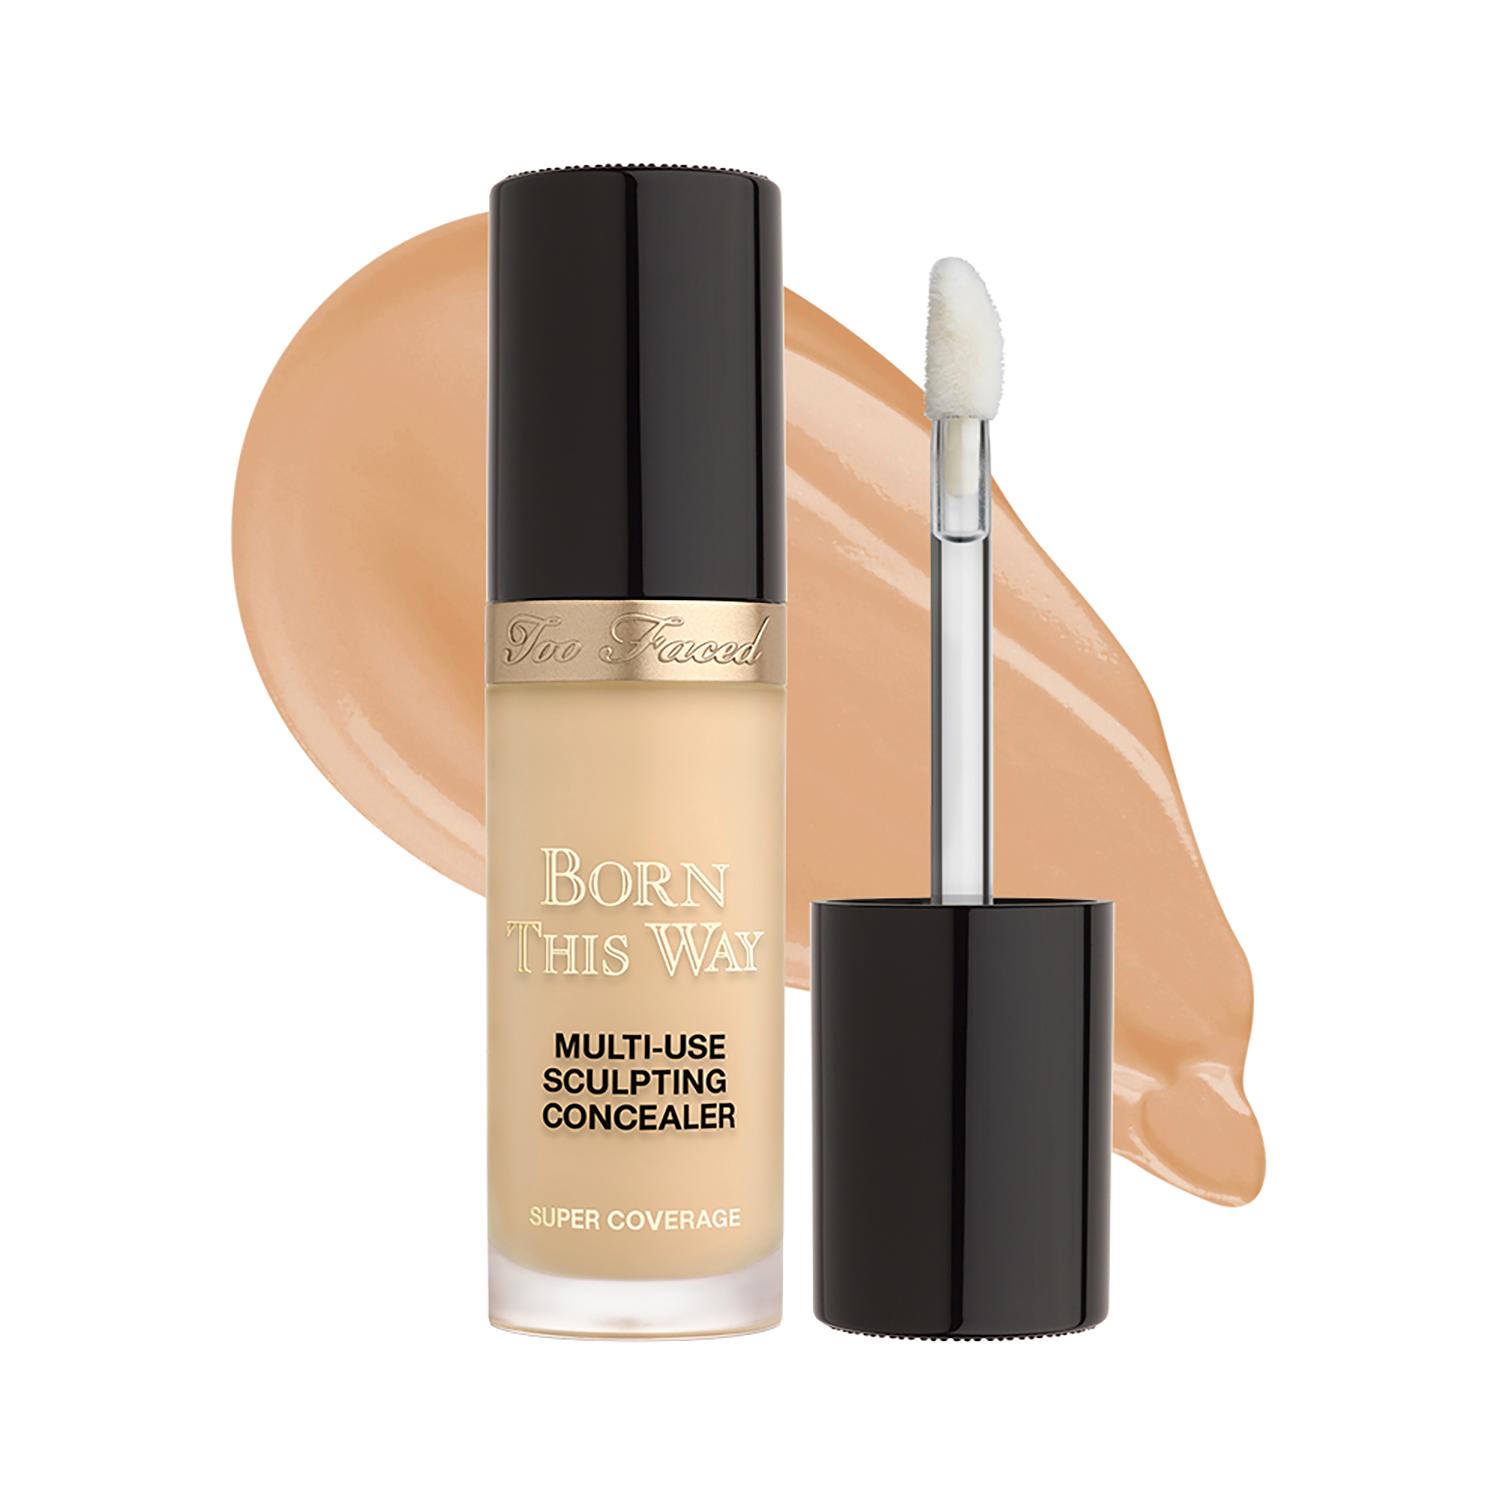 Too Faced | Too Faced Born This Way Super Coverage Multi Use Sculpting Concealer- Light Beige (13.5ml)